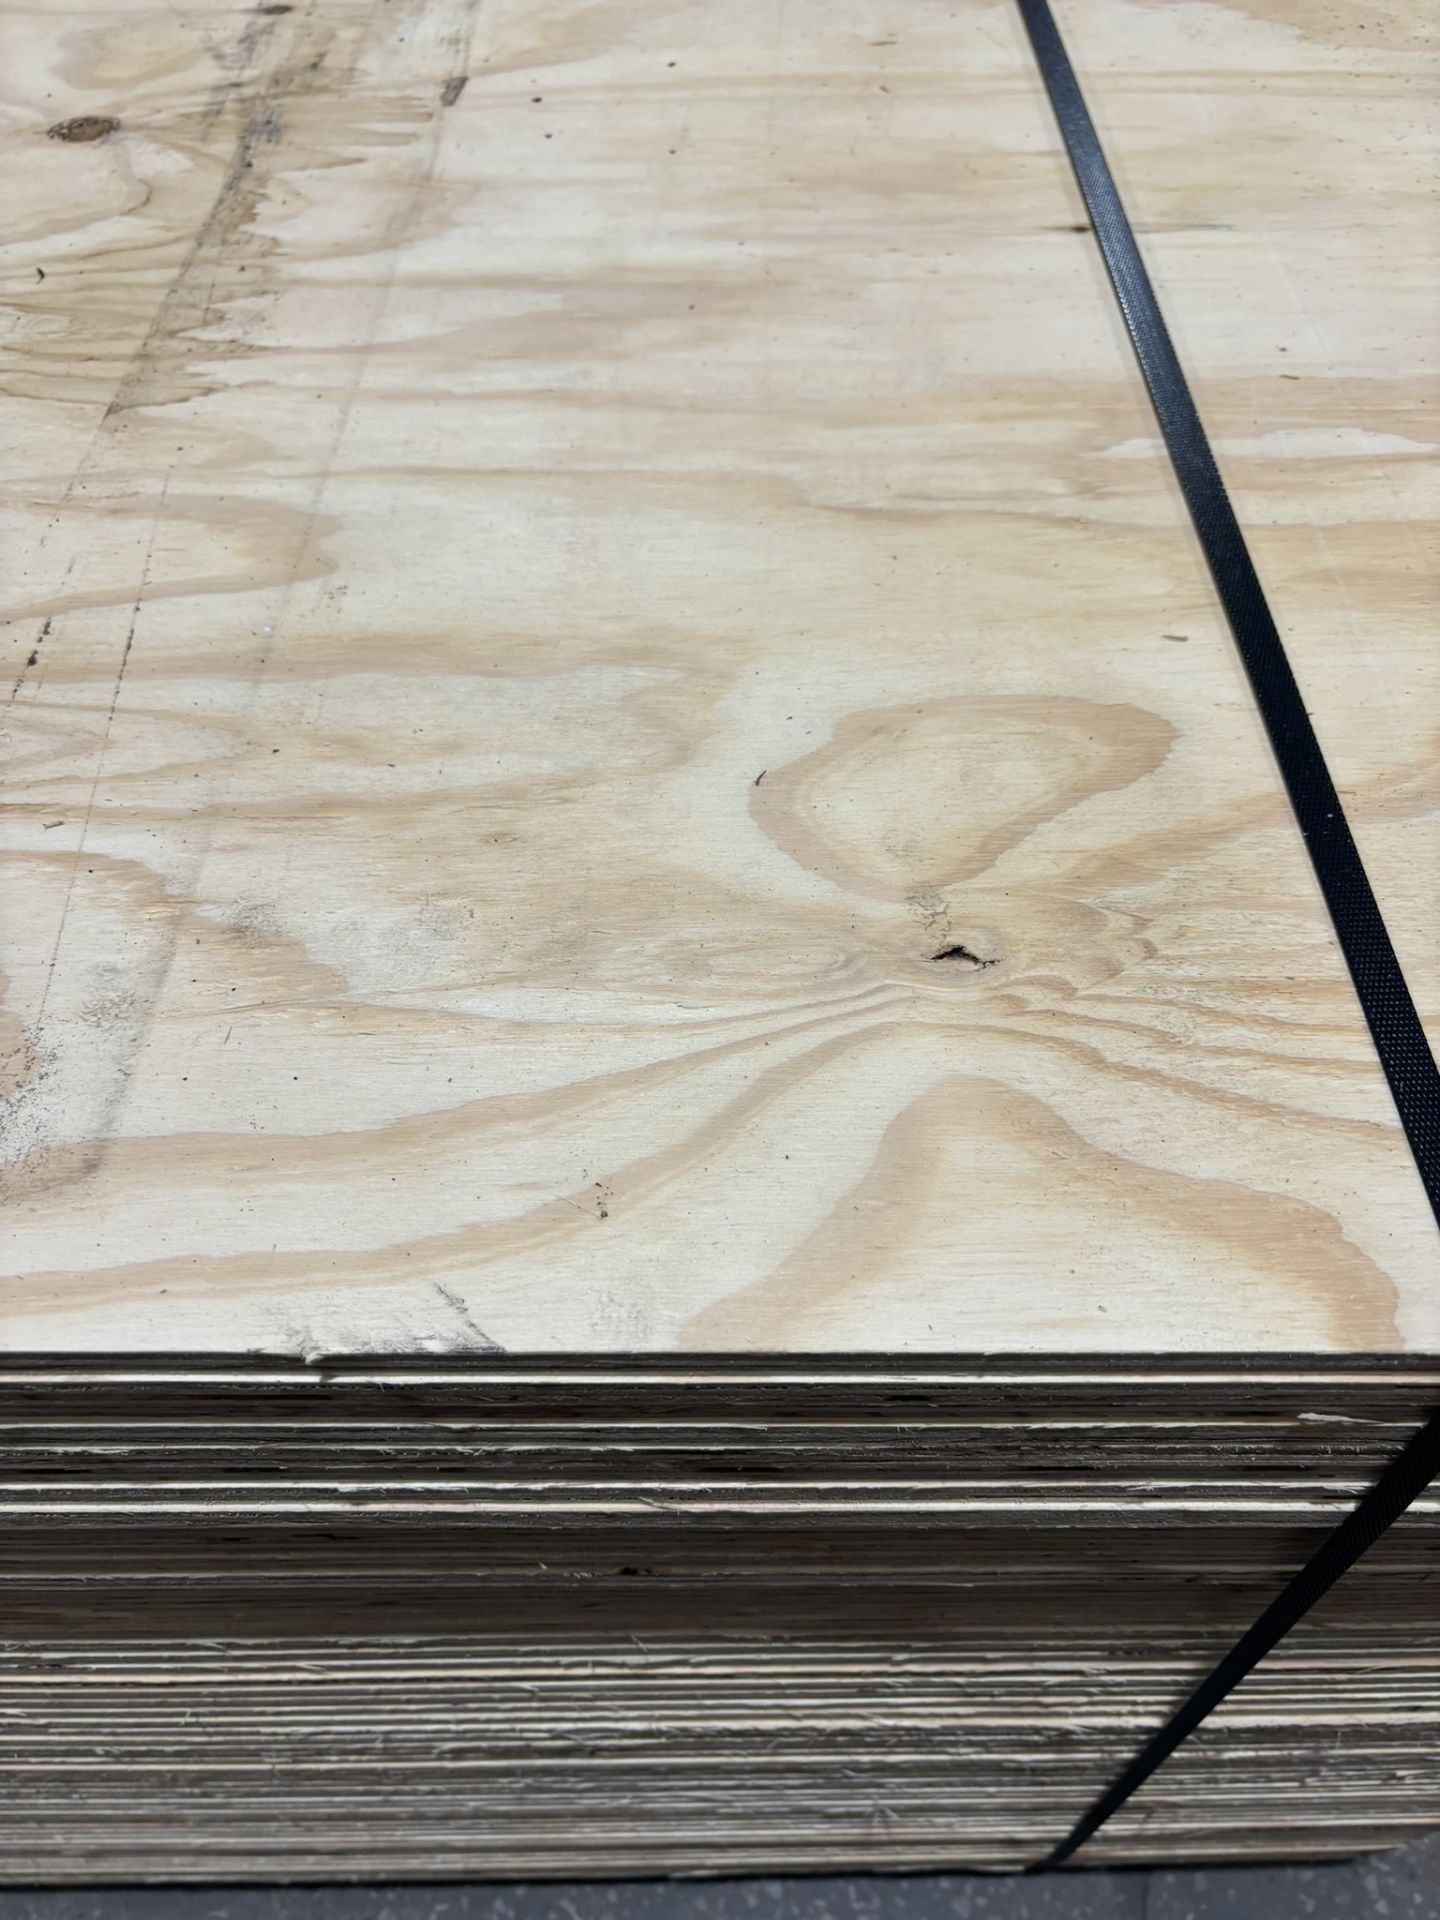 60 x Sheets Of Plywood | Size: 244cm x 122cm x 1cm - Image 4 of 7